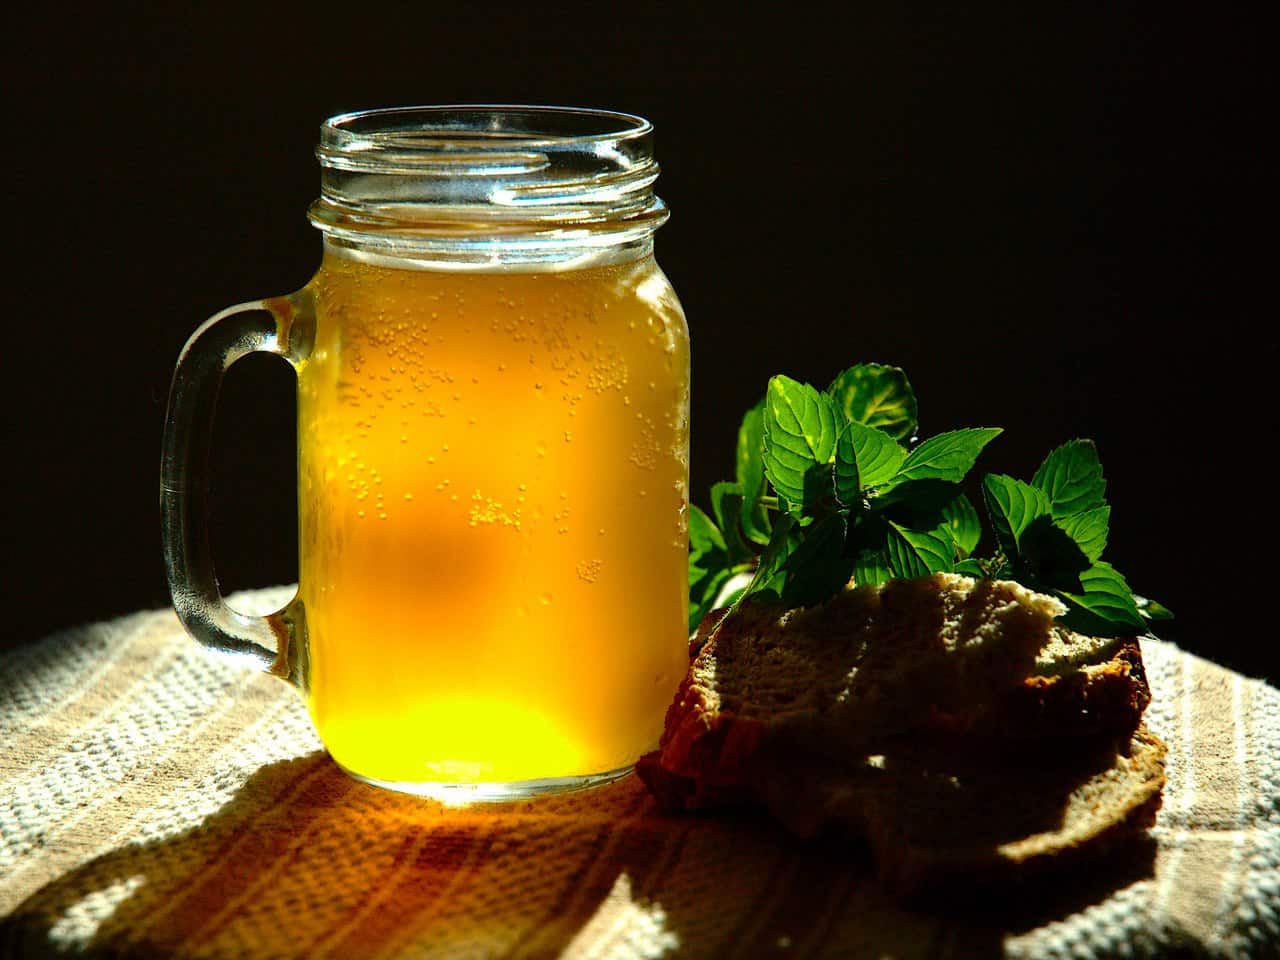 National drink of Russia - Kvass